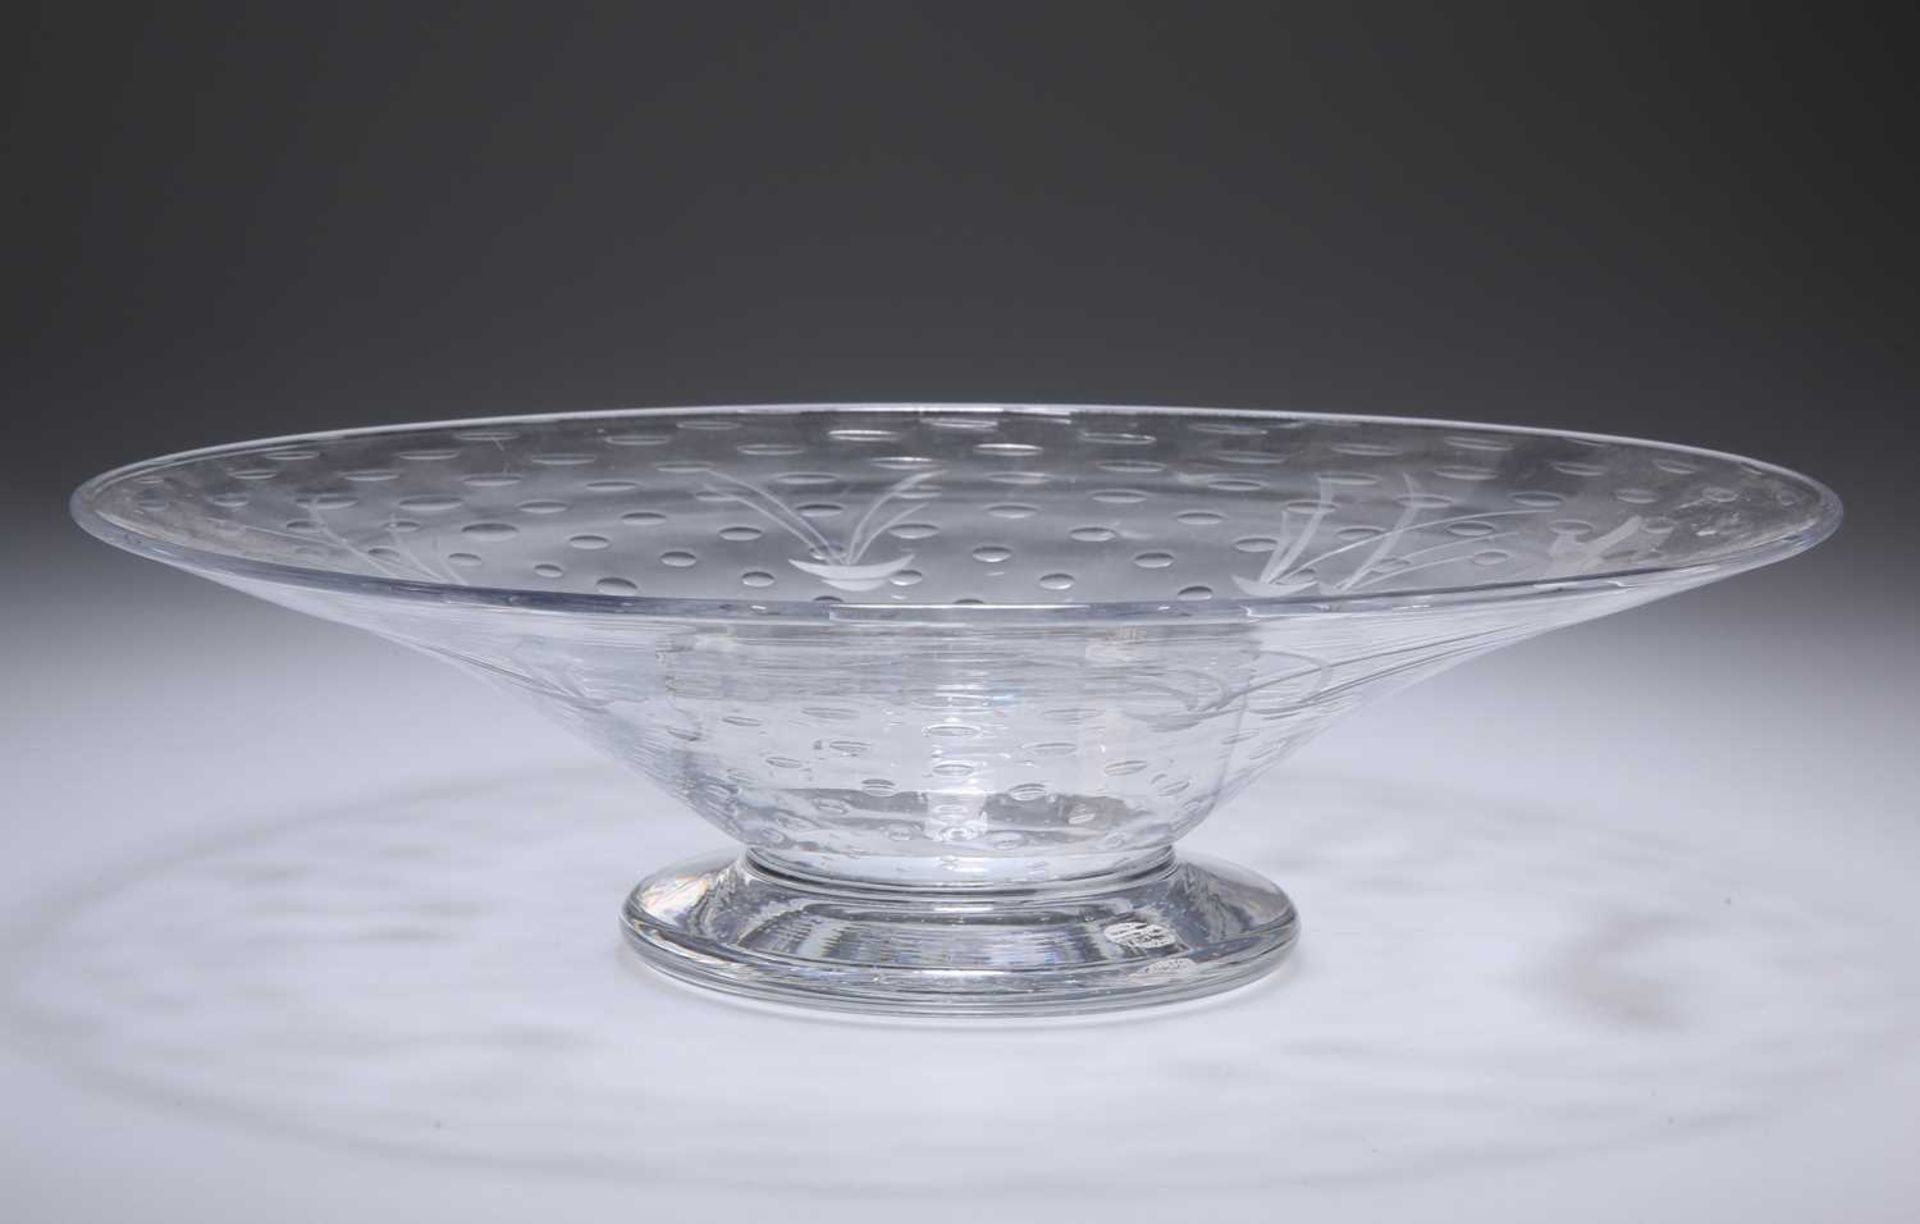 THOMAS WEBB & SONS AN EARLY 20TH CENTURY GLASS BOWL - Image 2 of 2